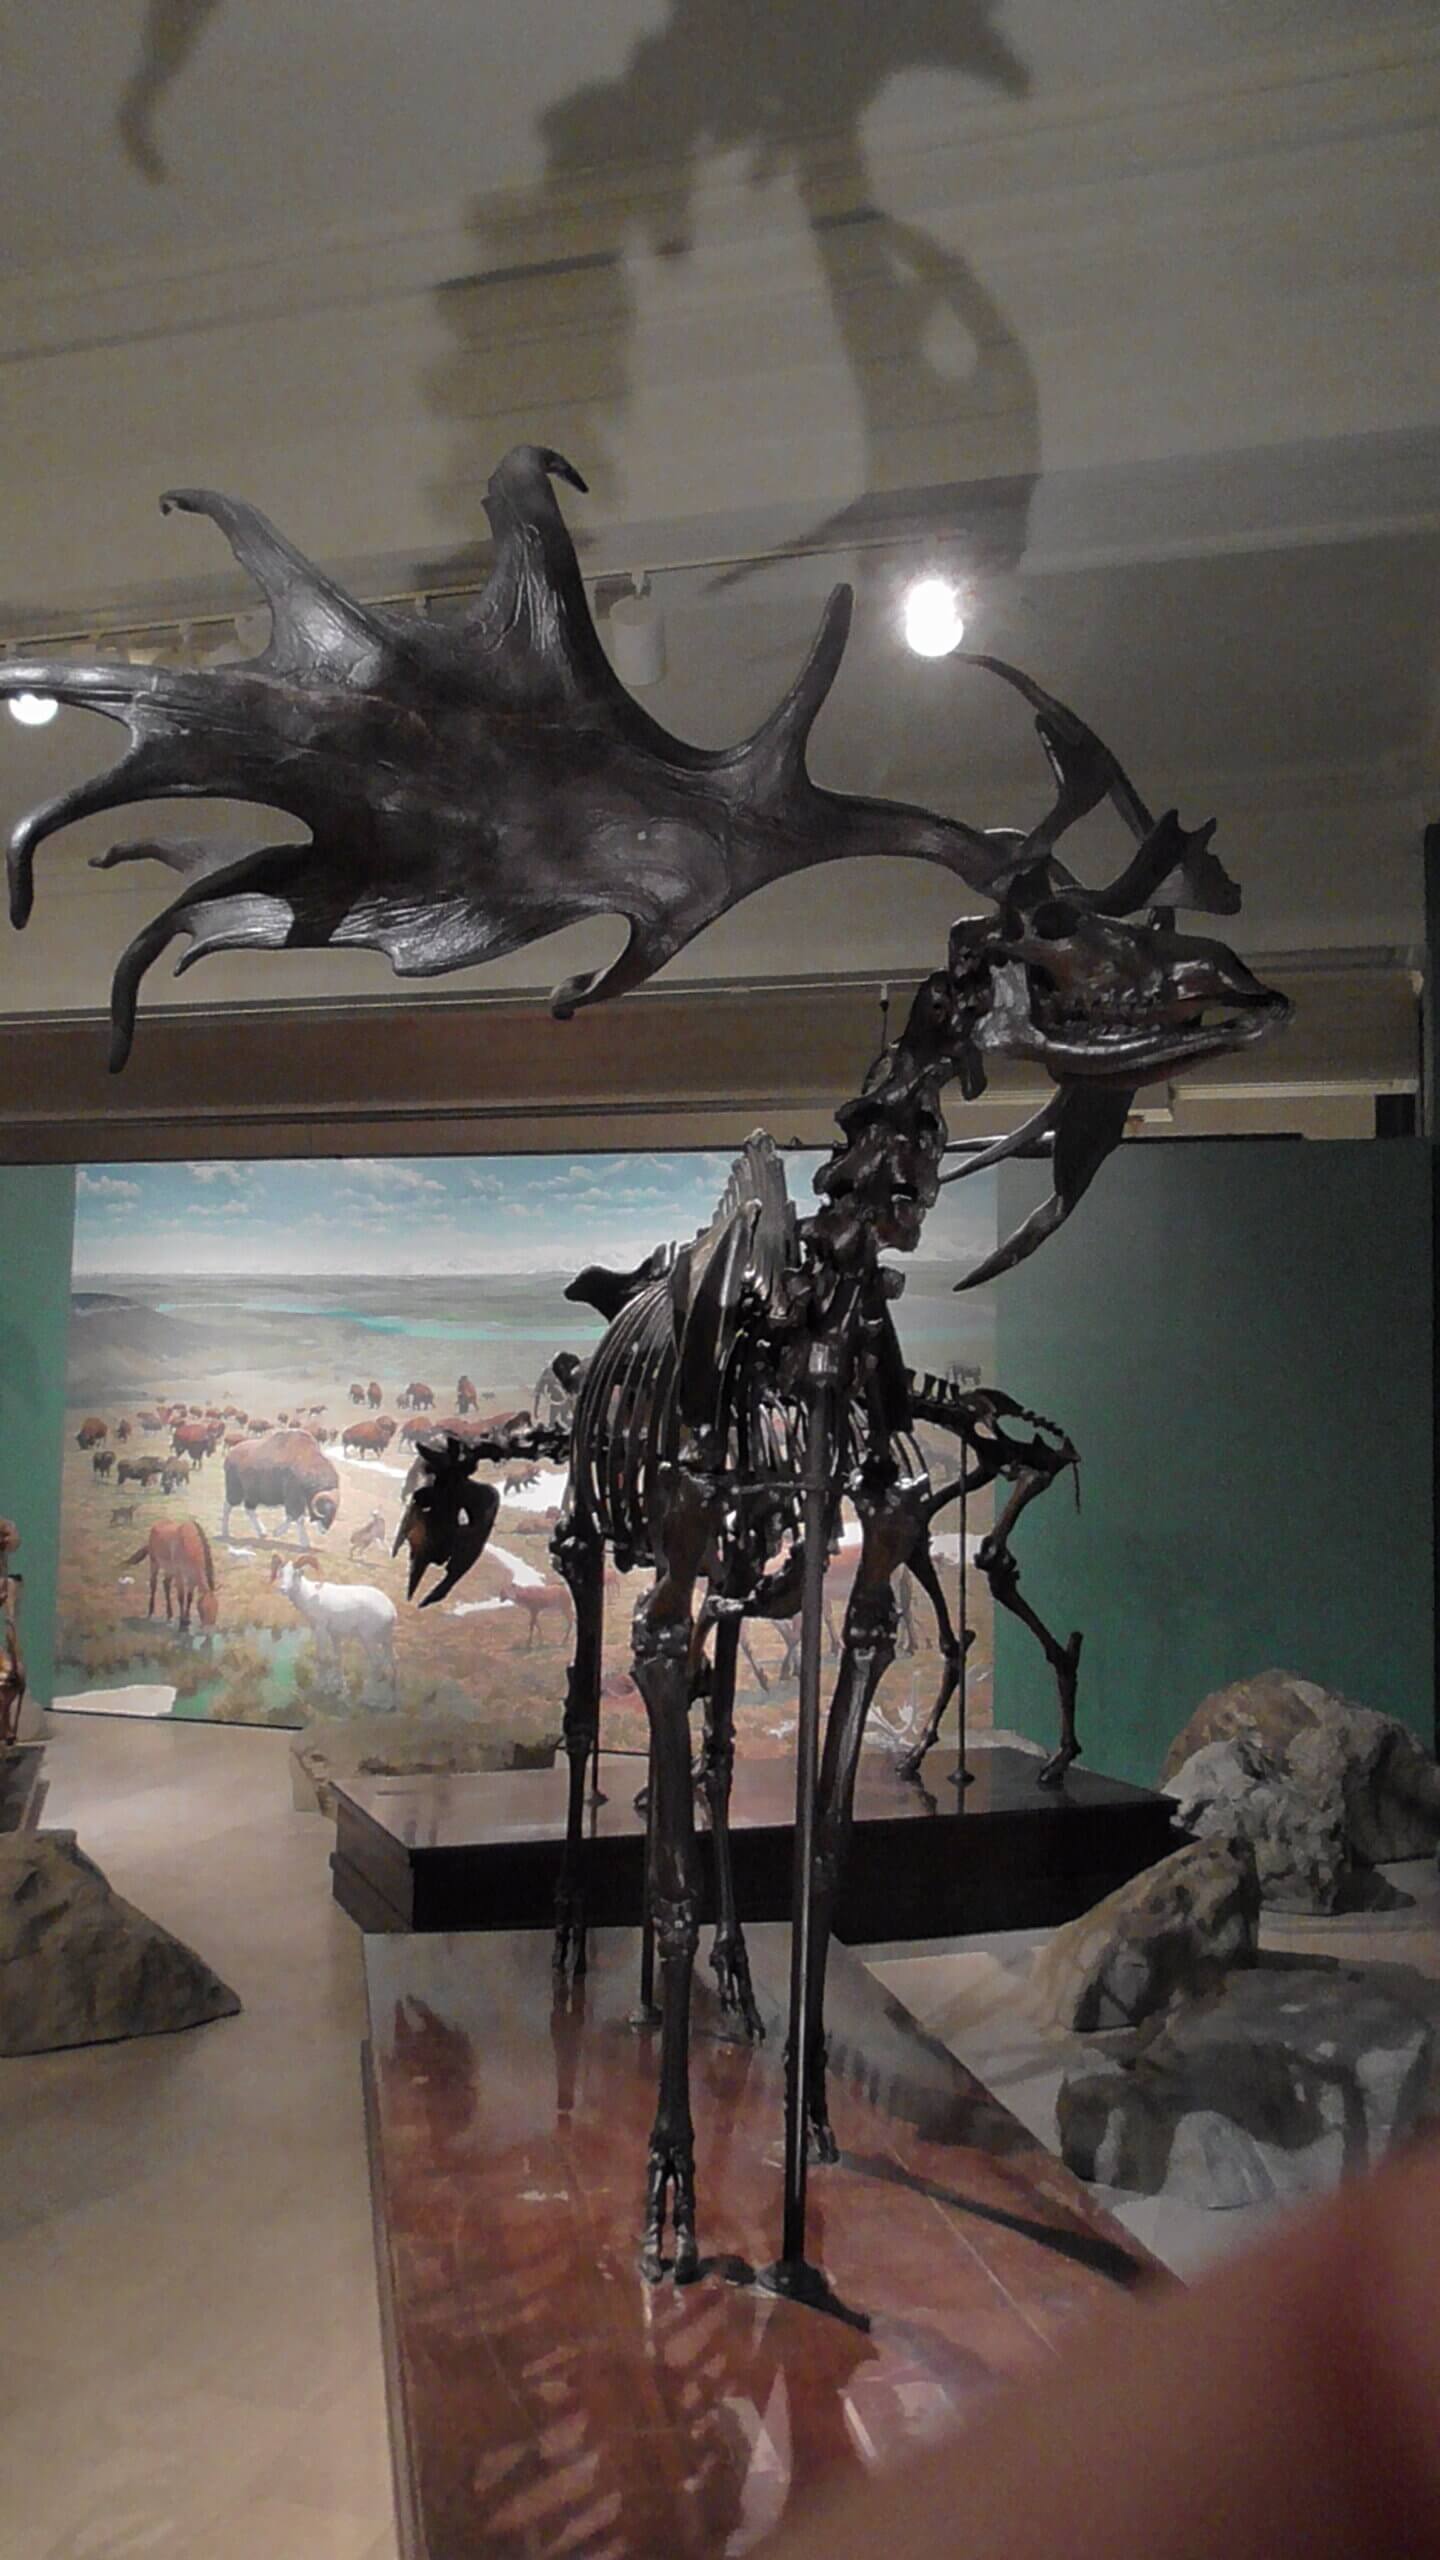 Irish Elk - Antlers could reach 12 feet from tip to tip